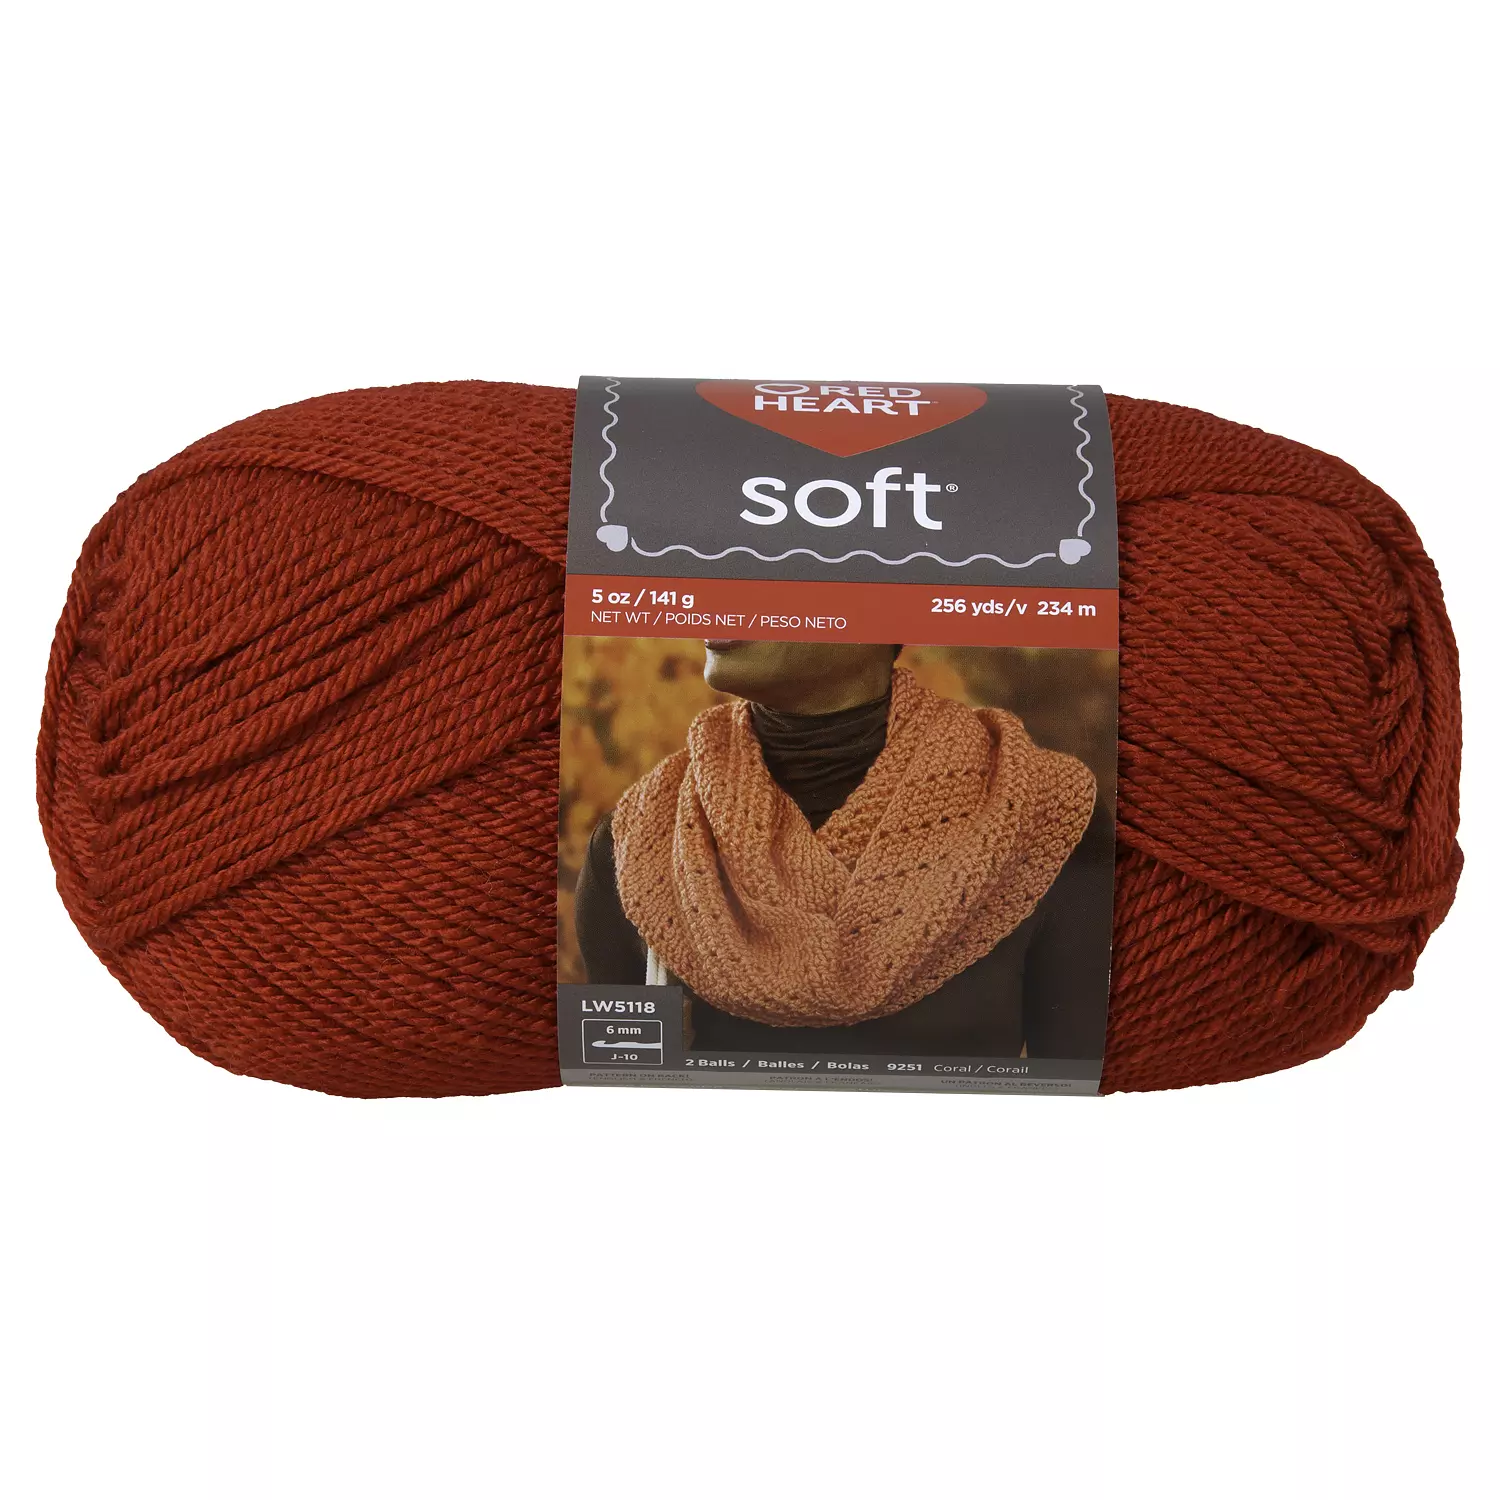 Red Heart Soft - Yarn, really red